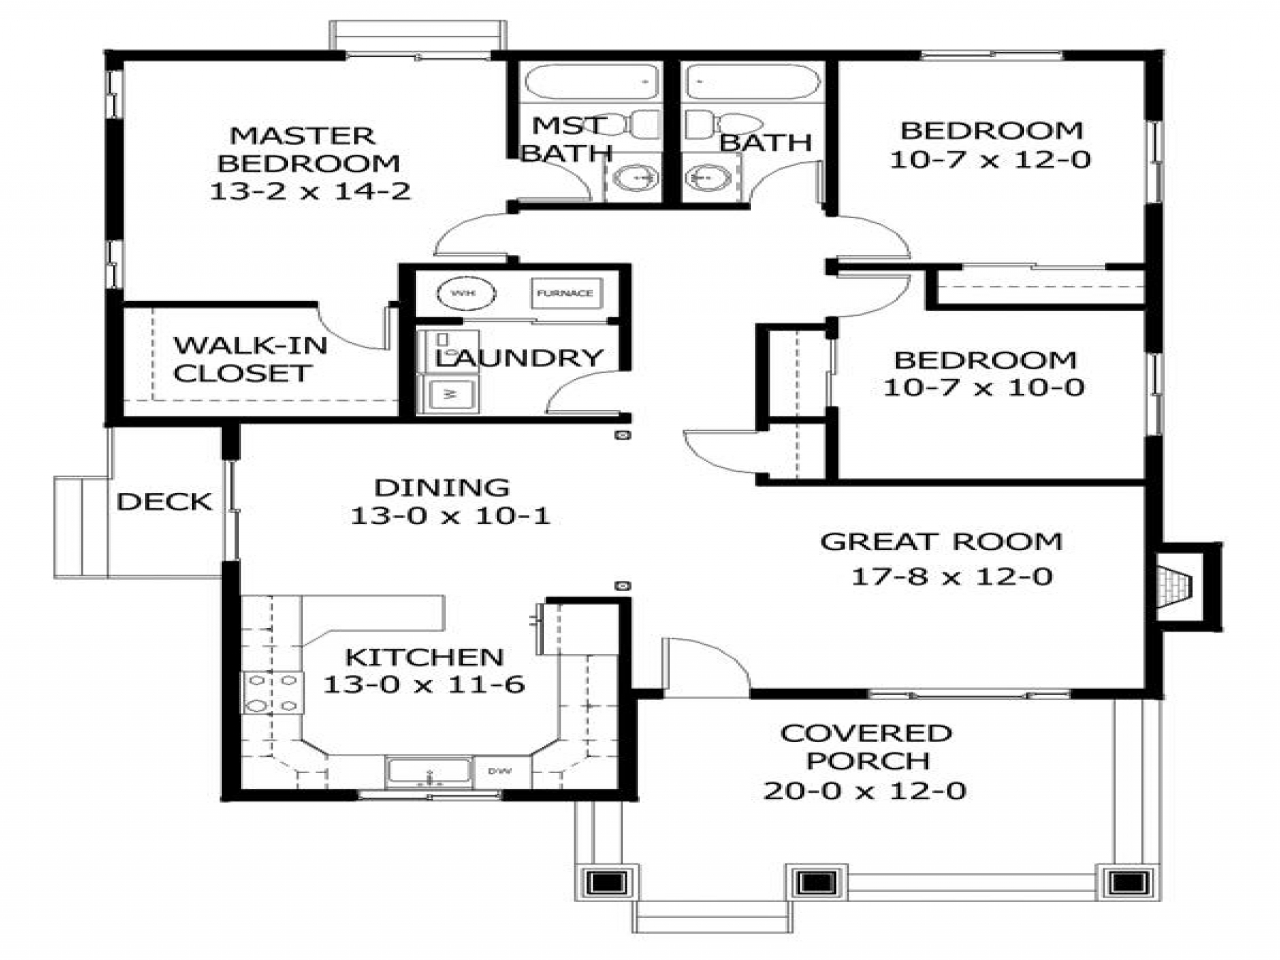 Chicago Bungalow House Plans Chicago Bungalow with Front